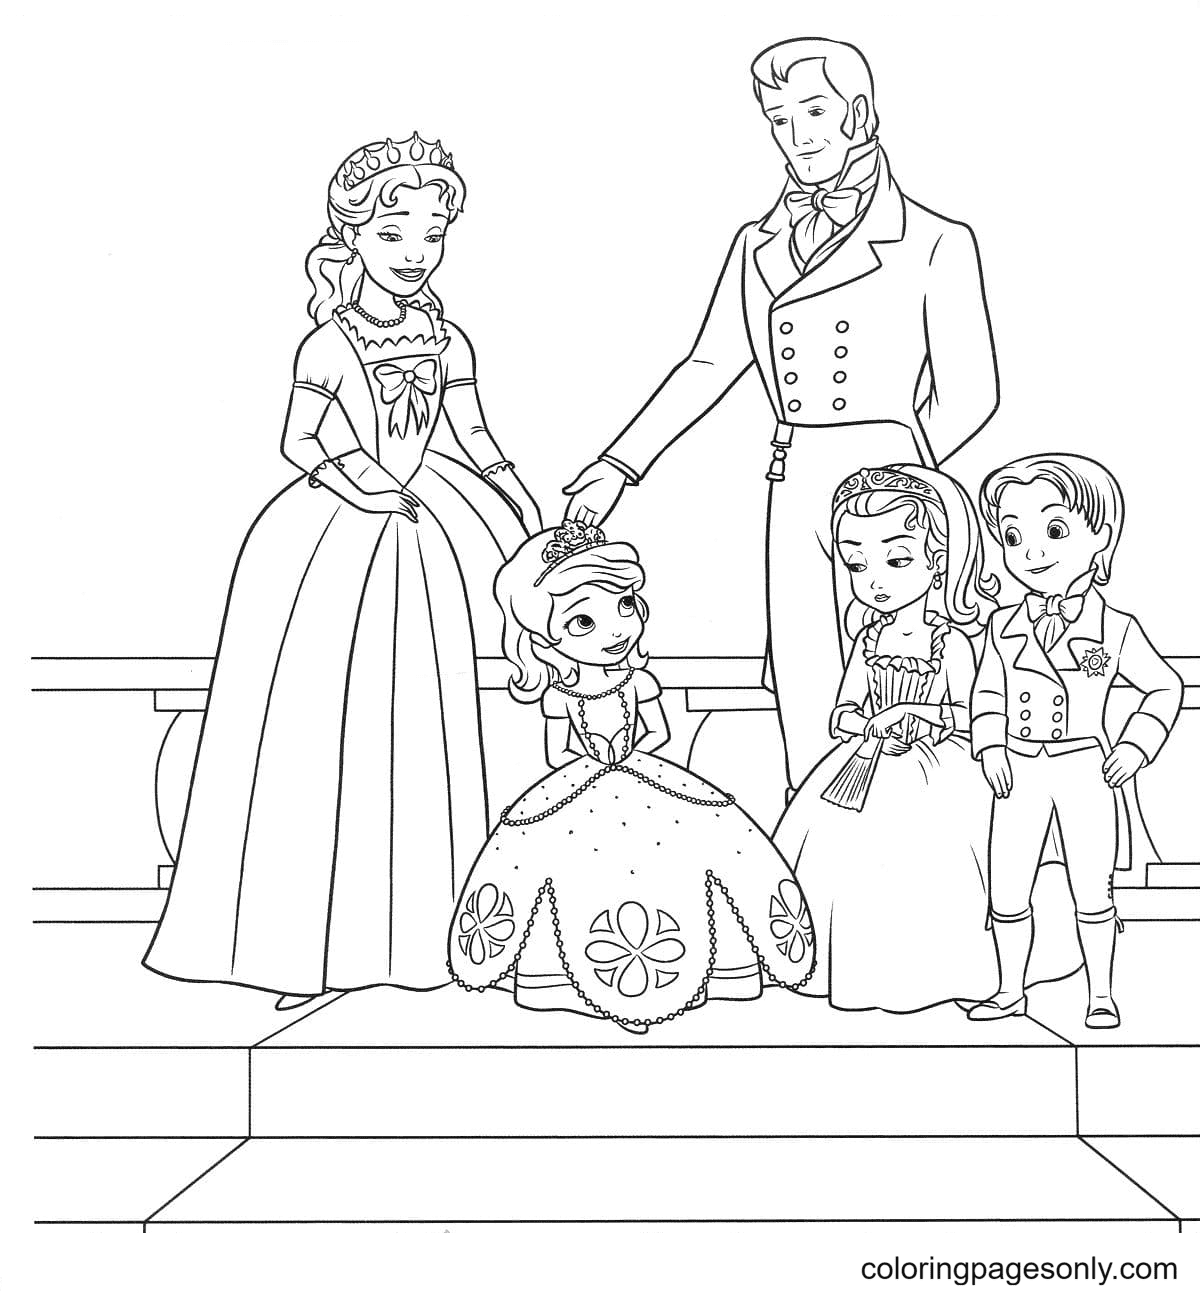 First day at the royal castle Coloring Page